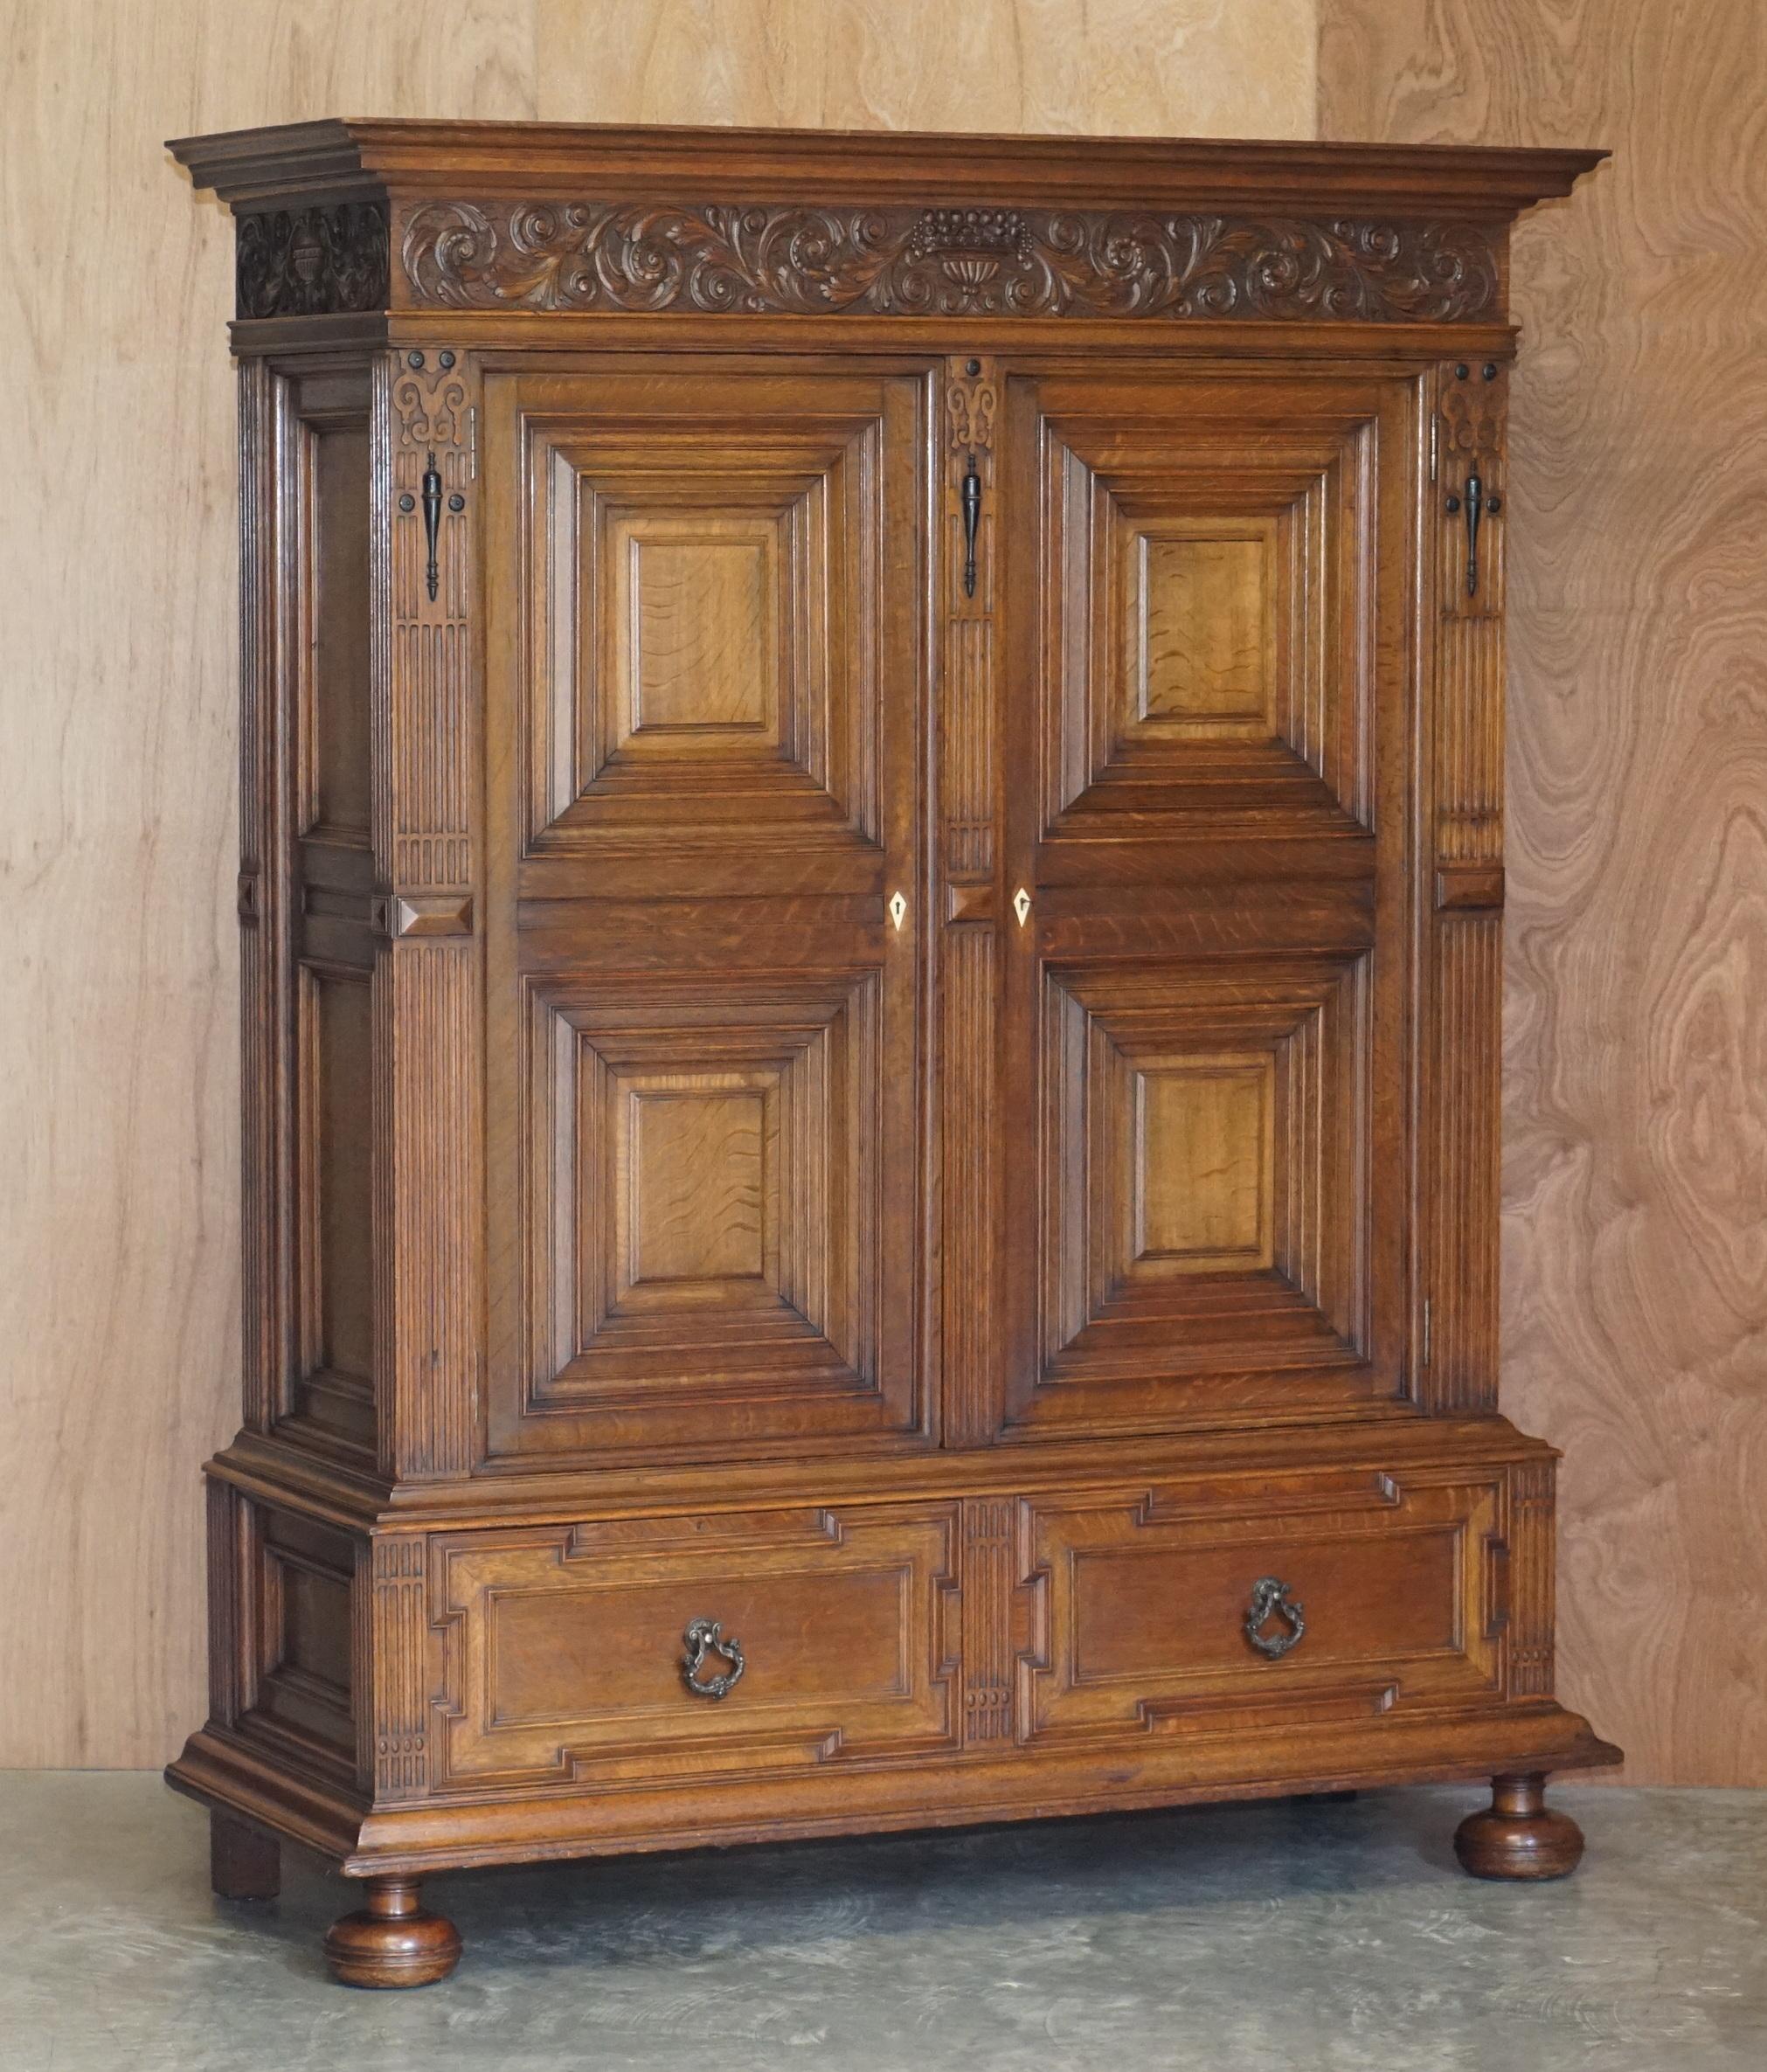 We are delighted to offer for sale this stunning near pair of original Victorian heavily hand carved oak library bookcase cabinets made by the world famous firm of Gillows of Lancaster & London

If you are in the market for the finest pair of